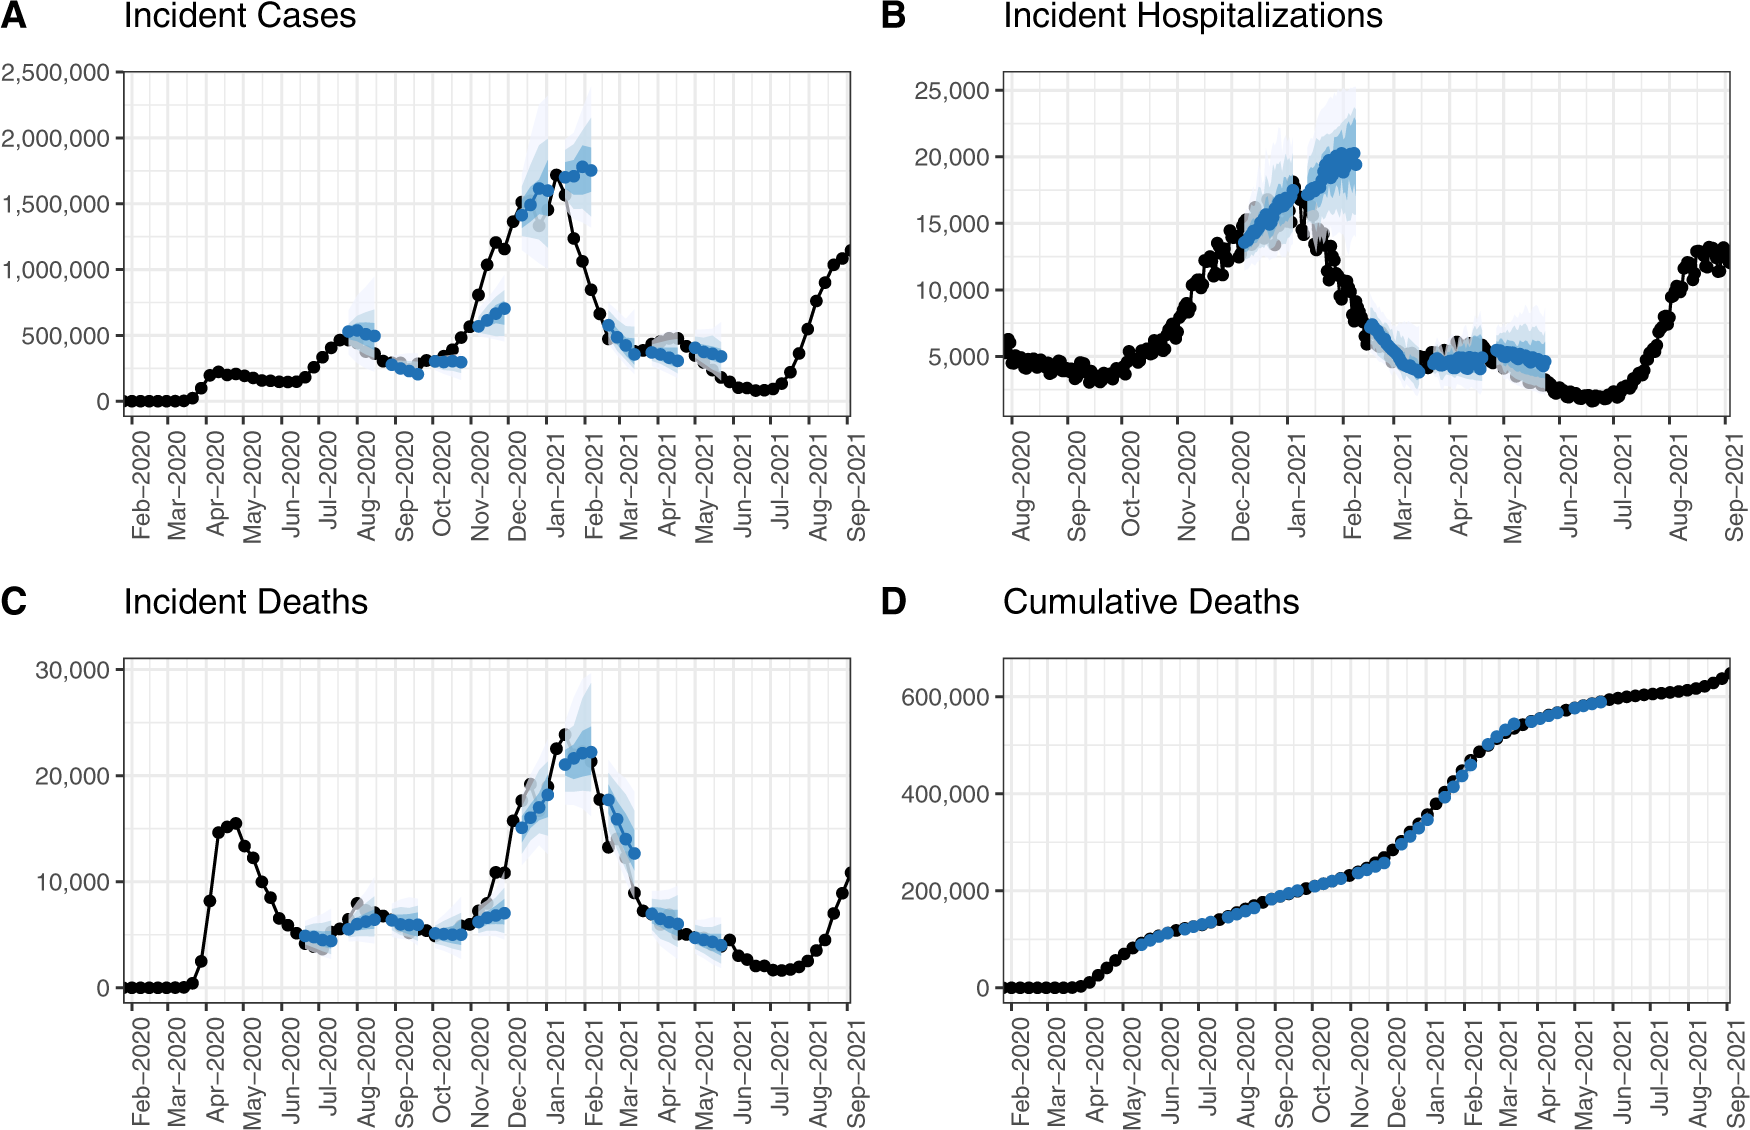 June 1: Tracking Florida COVID-19 Cases, Hospitalizations, and